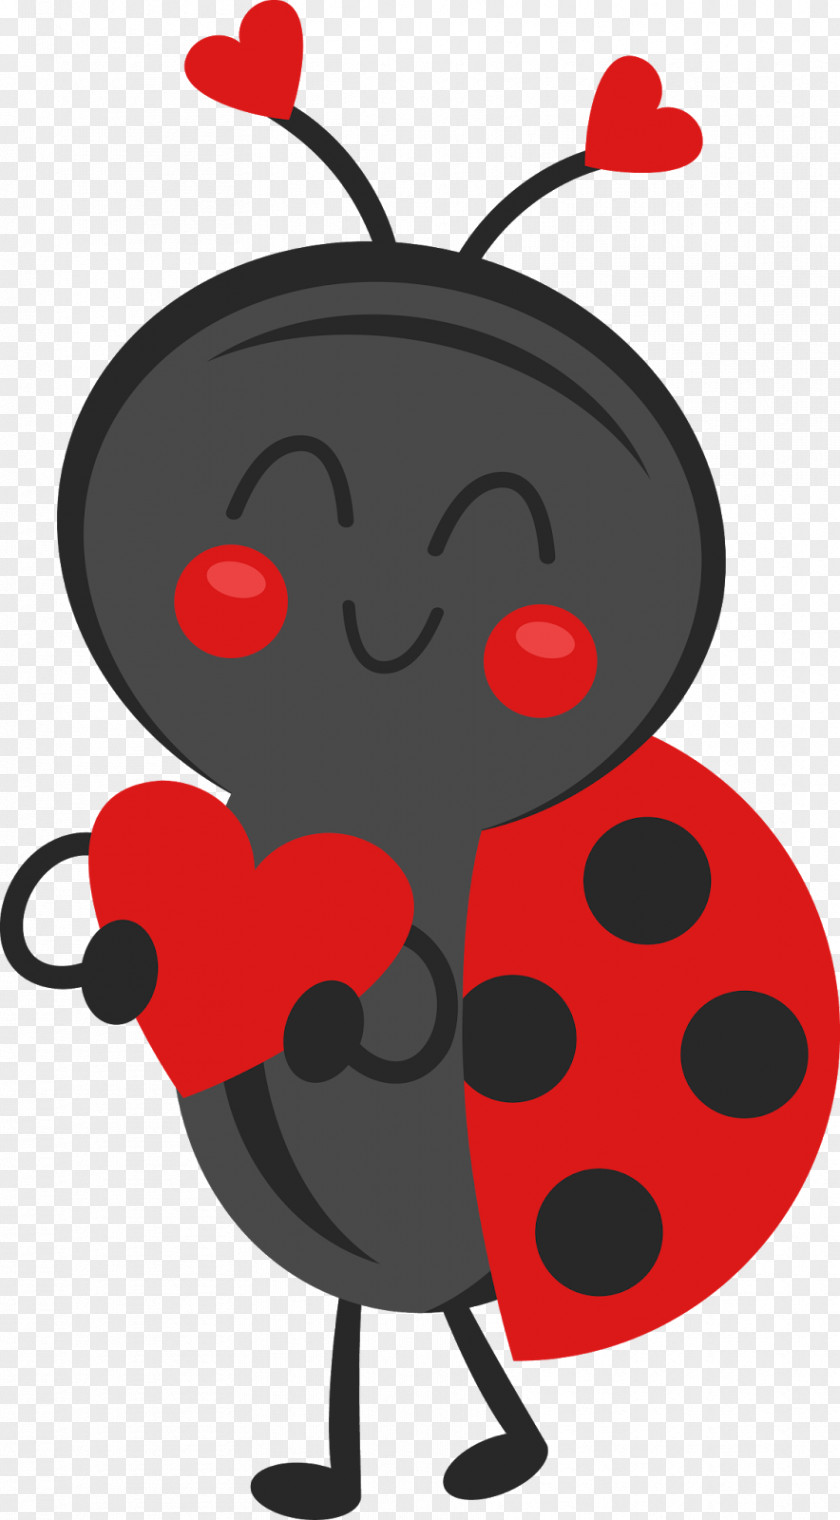 Ladybug Silhouette Cliparts Valentine's Day Ladybird Scrapbooking Scalable Vector Graphics Clip Art PNG